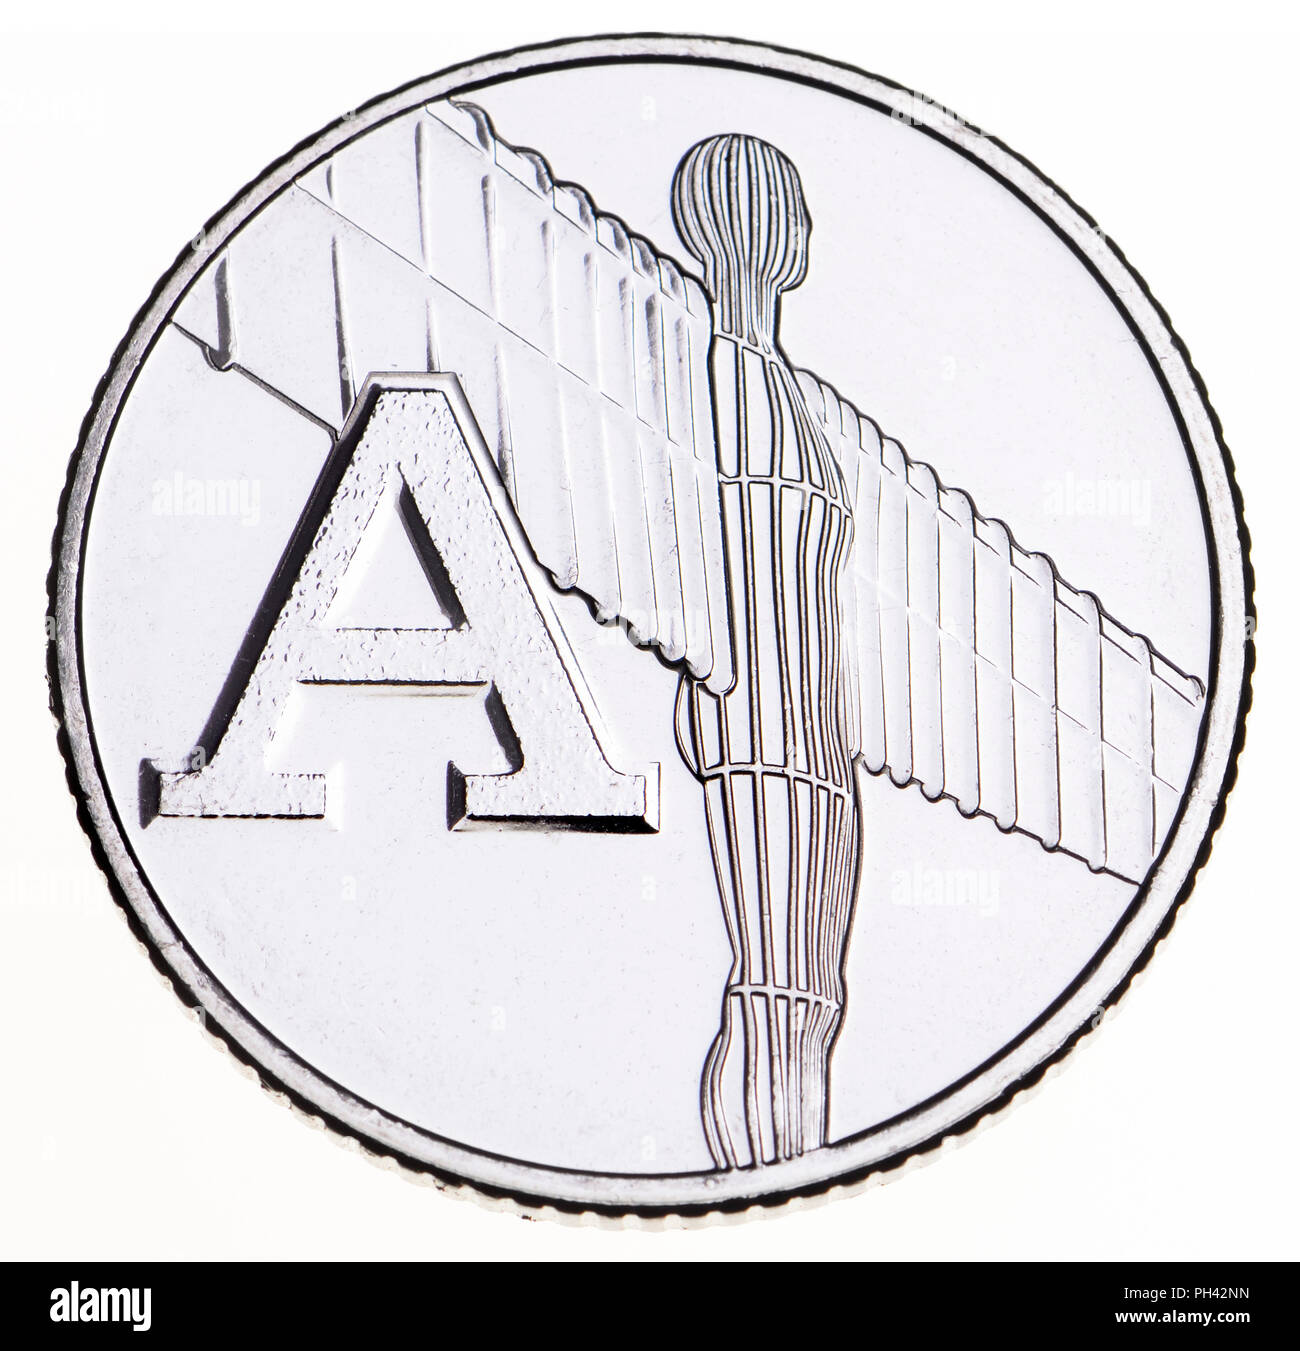 British 10p coin (reverse) from 2018 'Alphabet' series, celebrating Britishness. A - Angel of the North (Anthony Gormley statue) Stock Photo